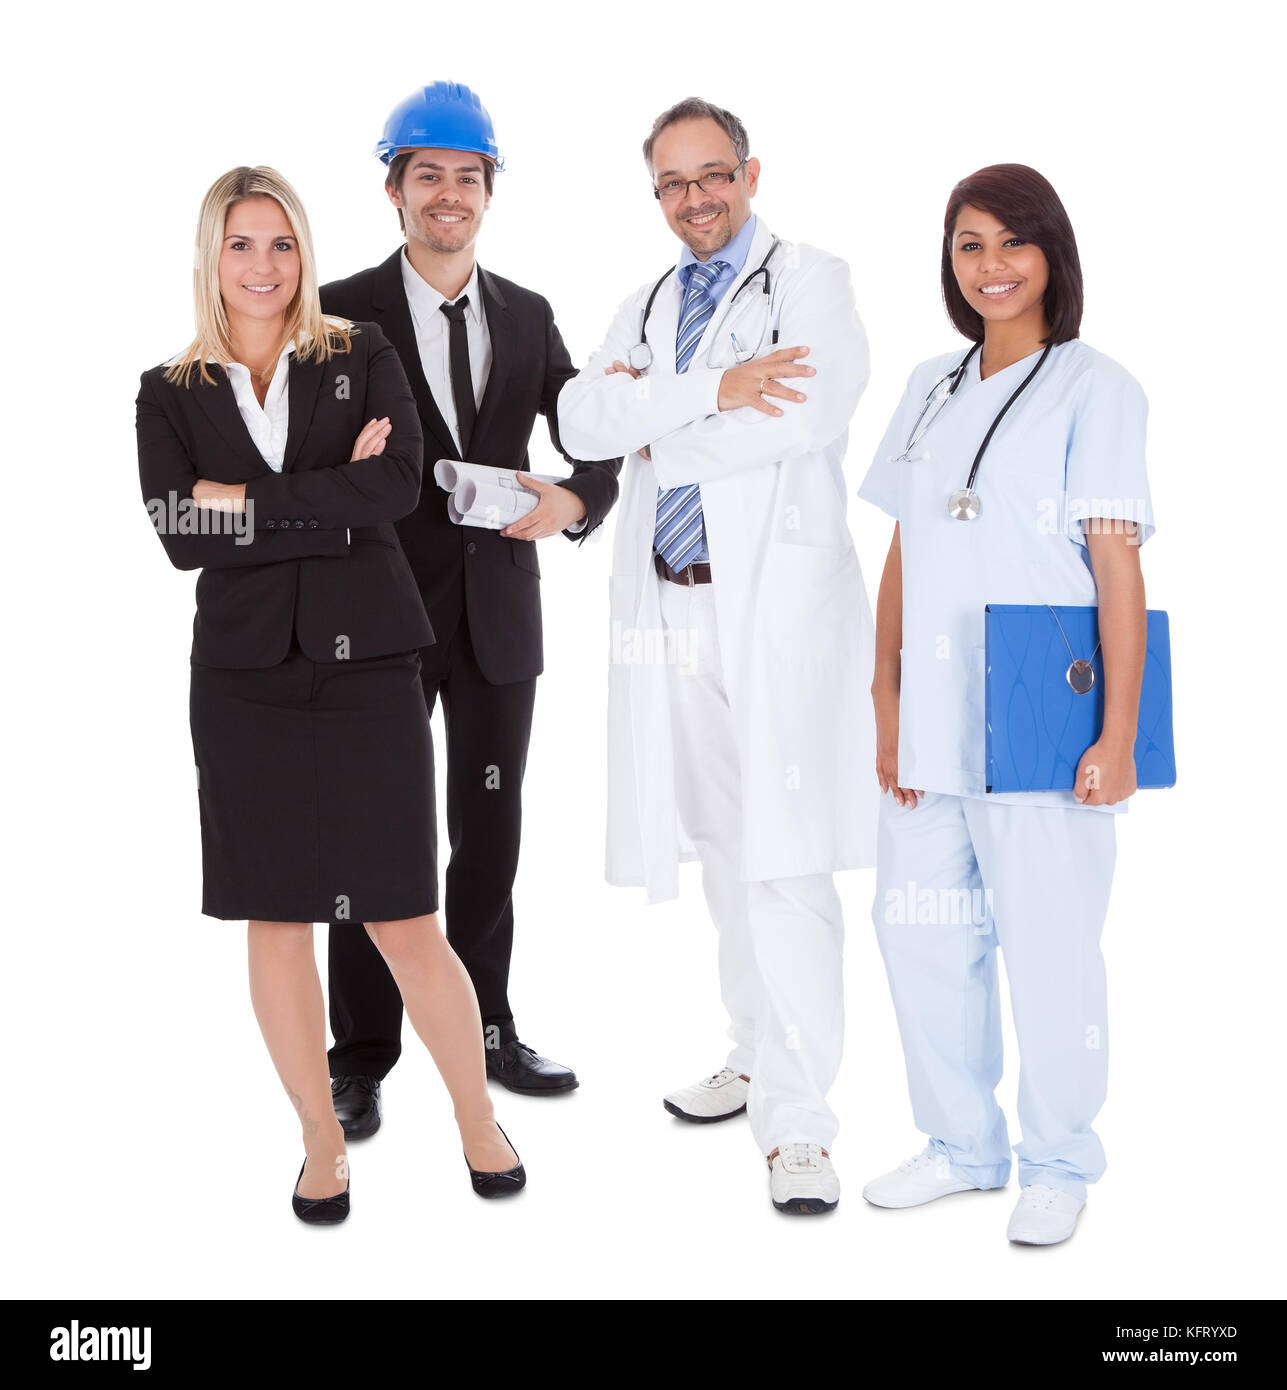 Portrait of happy people of different professions together on white background Stock Photo